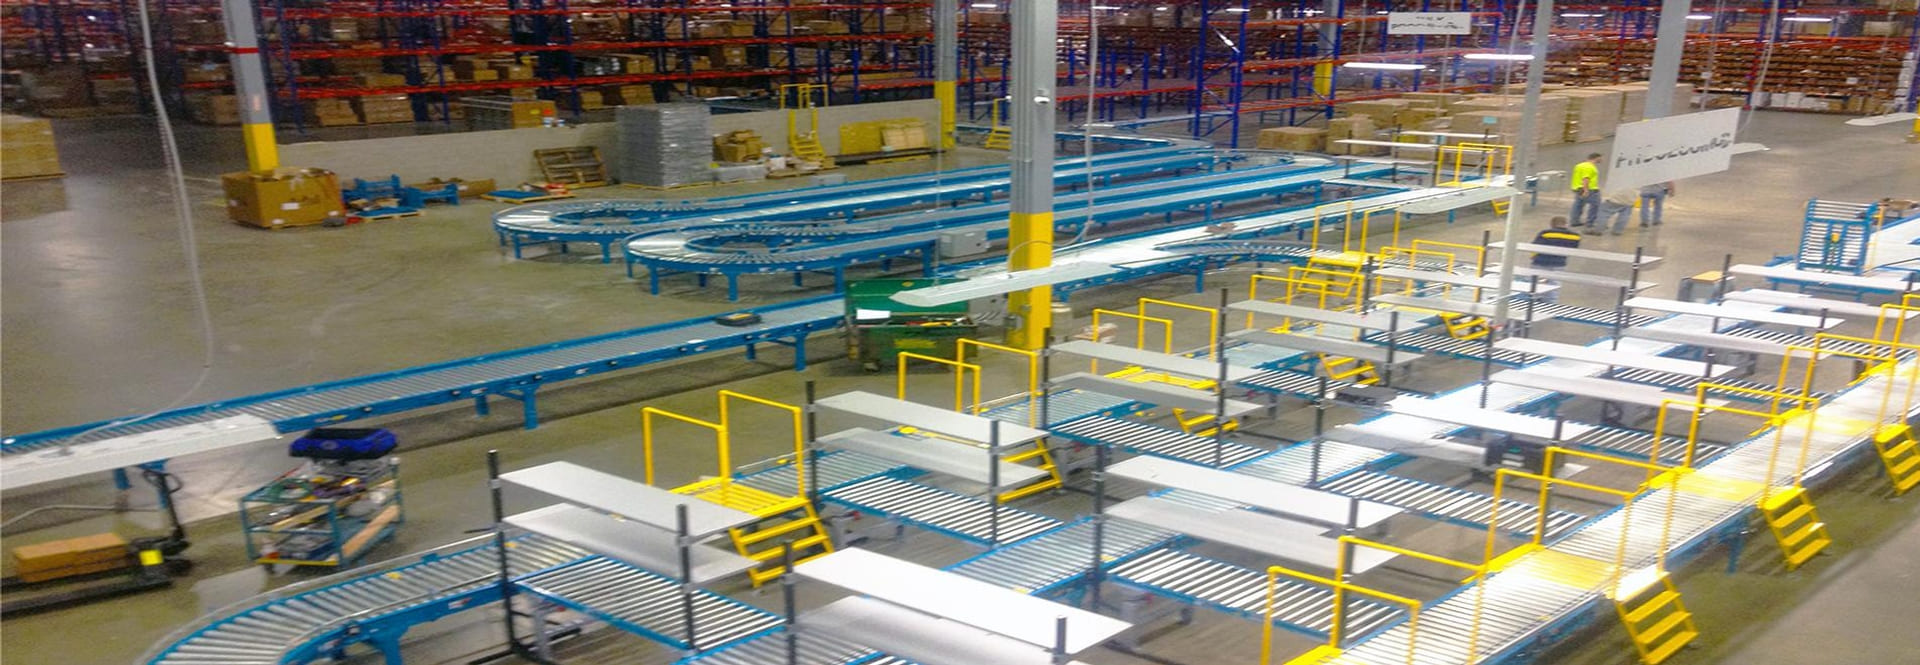 Design and manufacture of conveyors in Canada